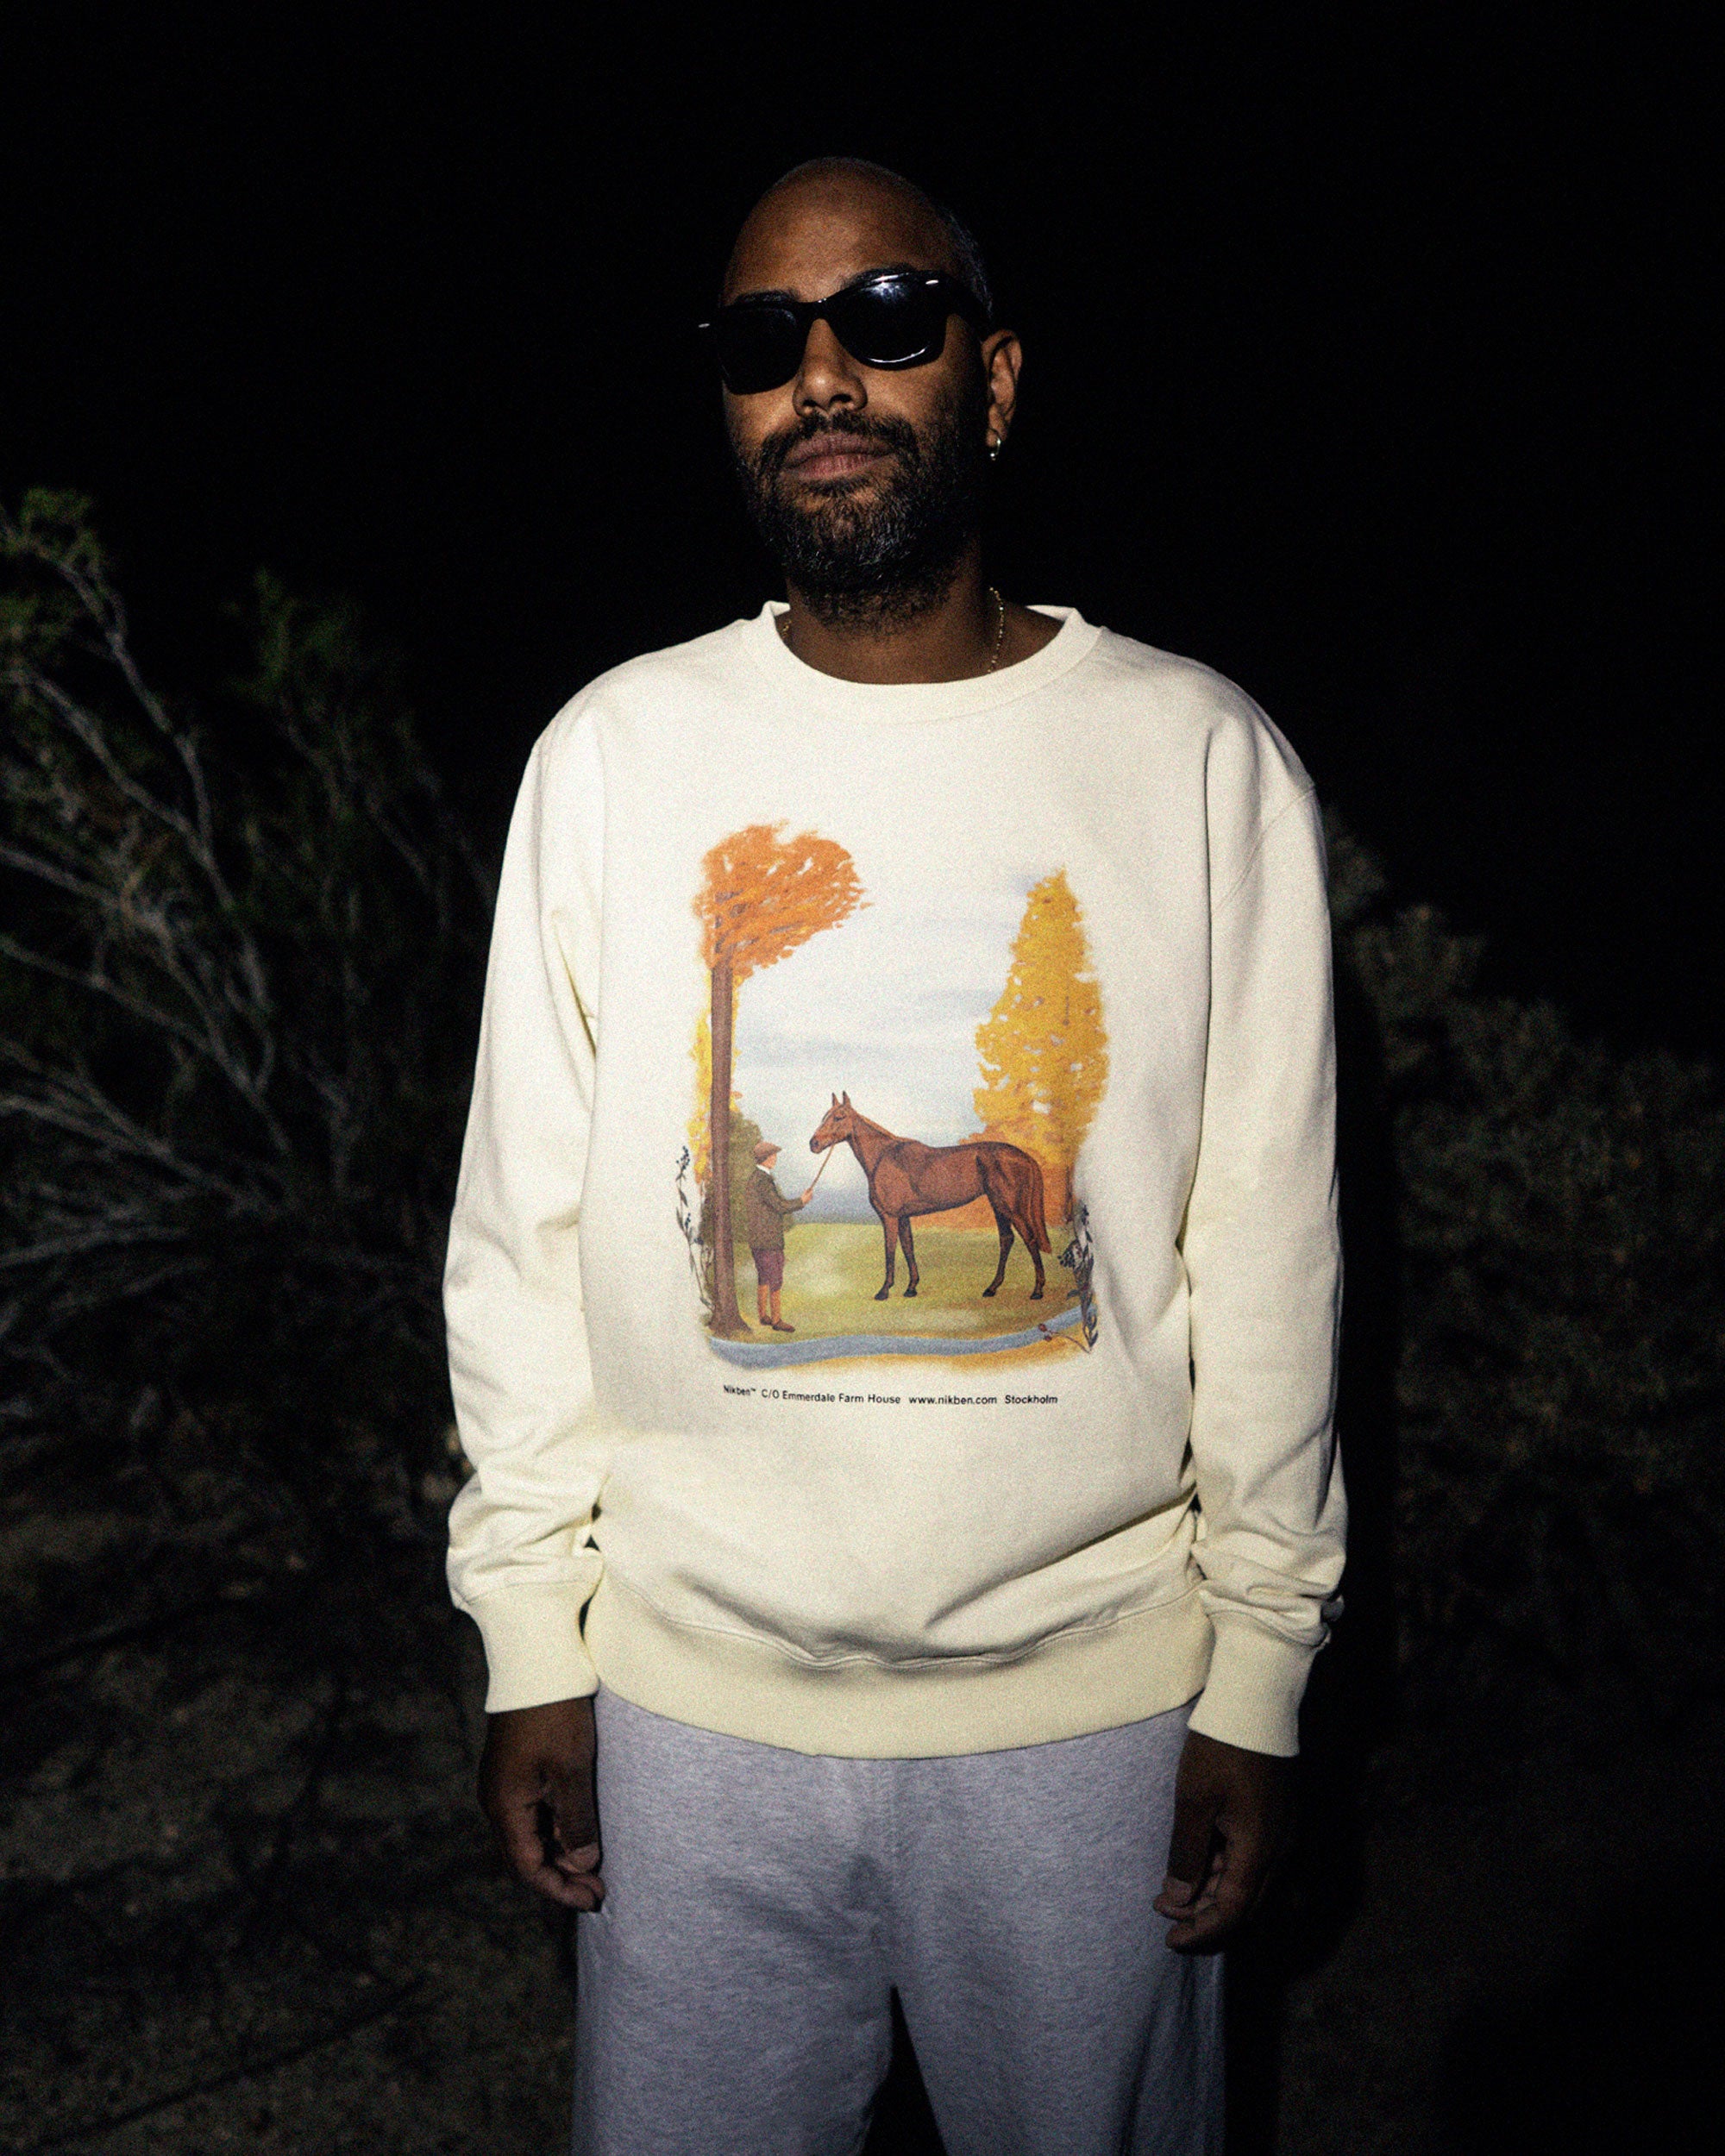 Male model wearing a cream colored sweatshirt with a man and a horse print.